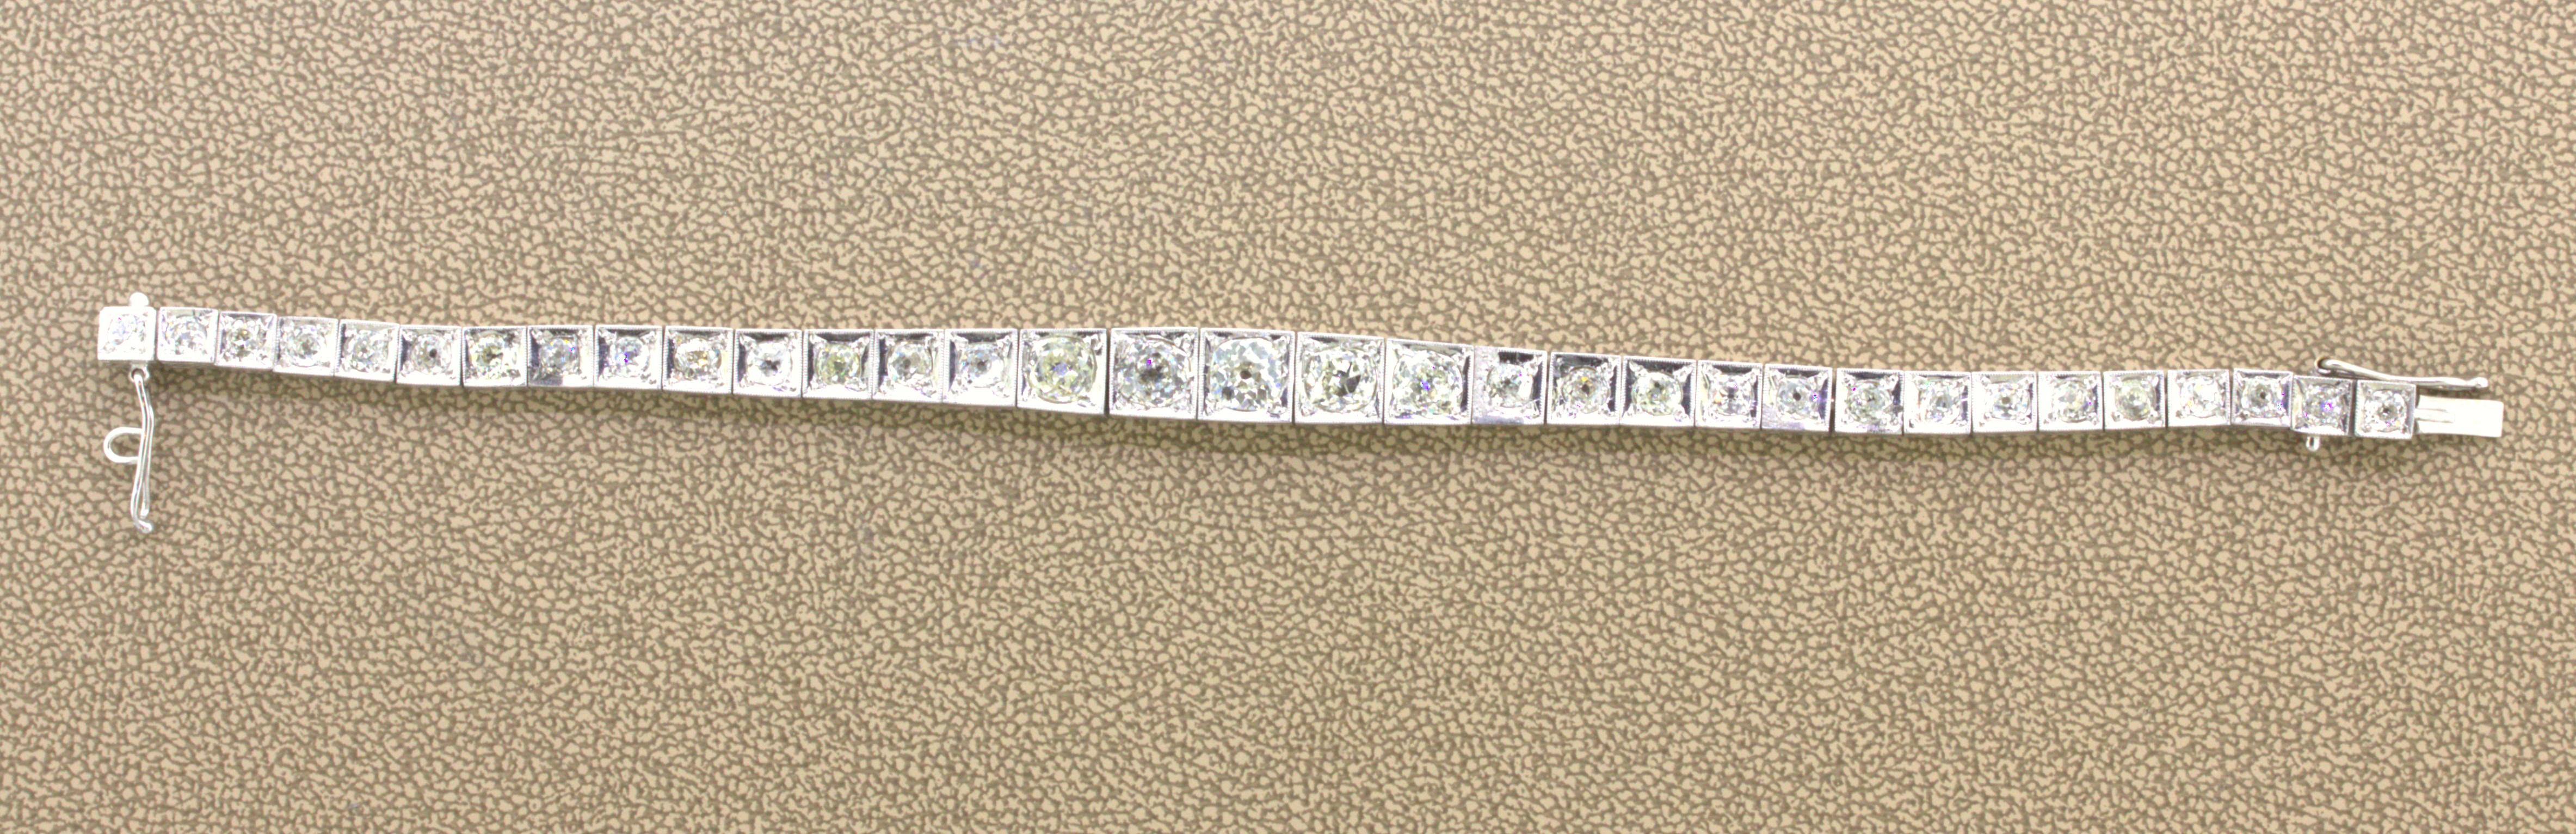 Art Deco Diamond Platinum Tennis Bracelet

A sleek and stylish Art Deco diamond tennis bracelet made in the 1930’s. It features a row of old-cut diamonds weighing a total of approximately 7.00 carats with the largest center diamond weighing 1 carat